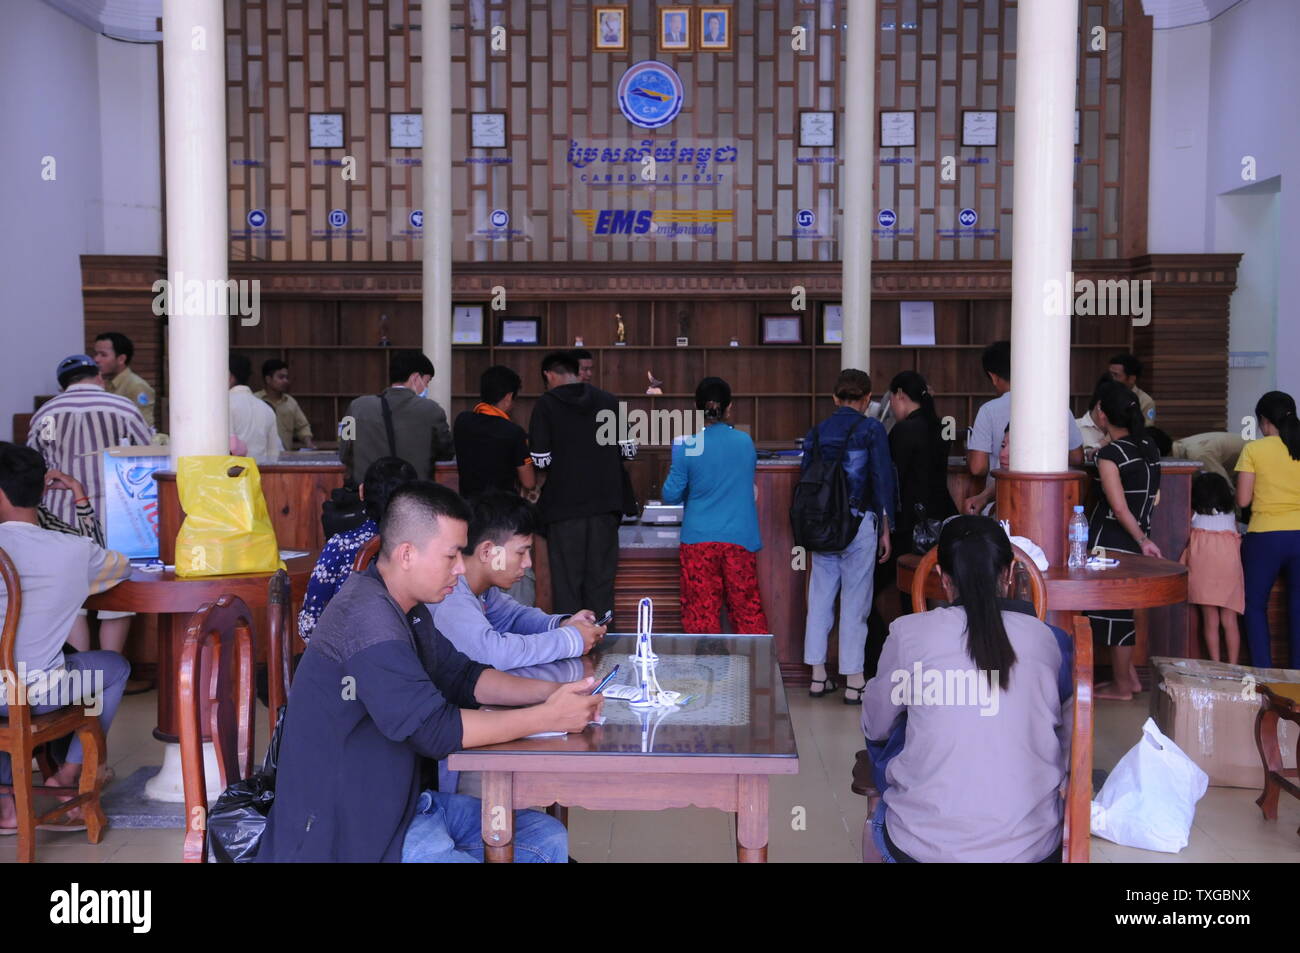 Cambodians mailing at the post office, clocks w/ time zones from around the world on wall, Phnom Penh, Cambodia. credit: Kraig Lieb Stock Photo